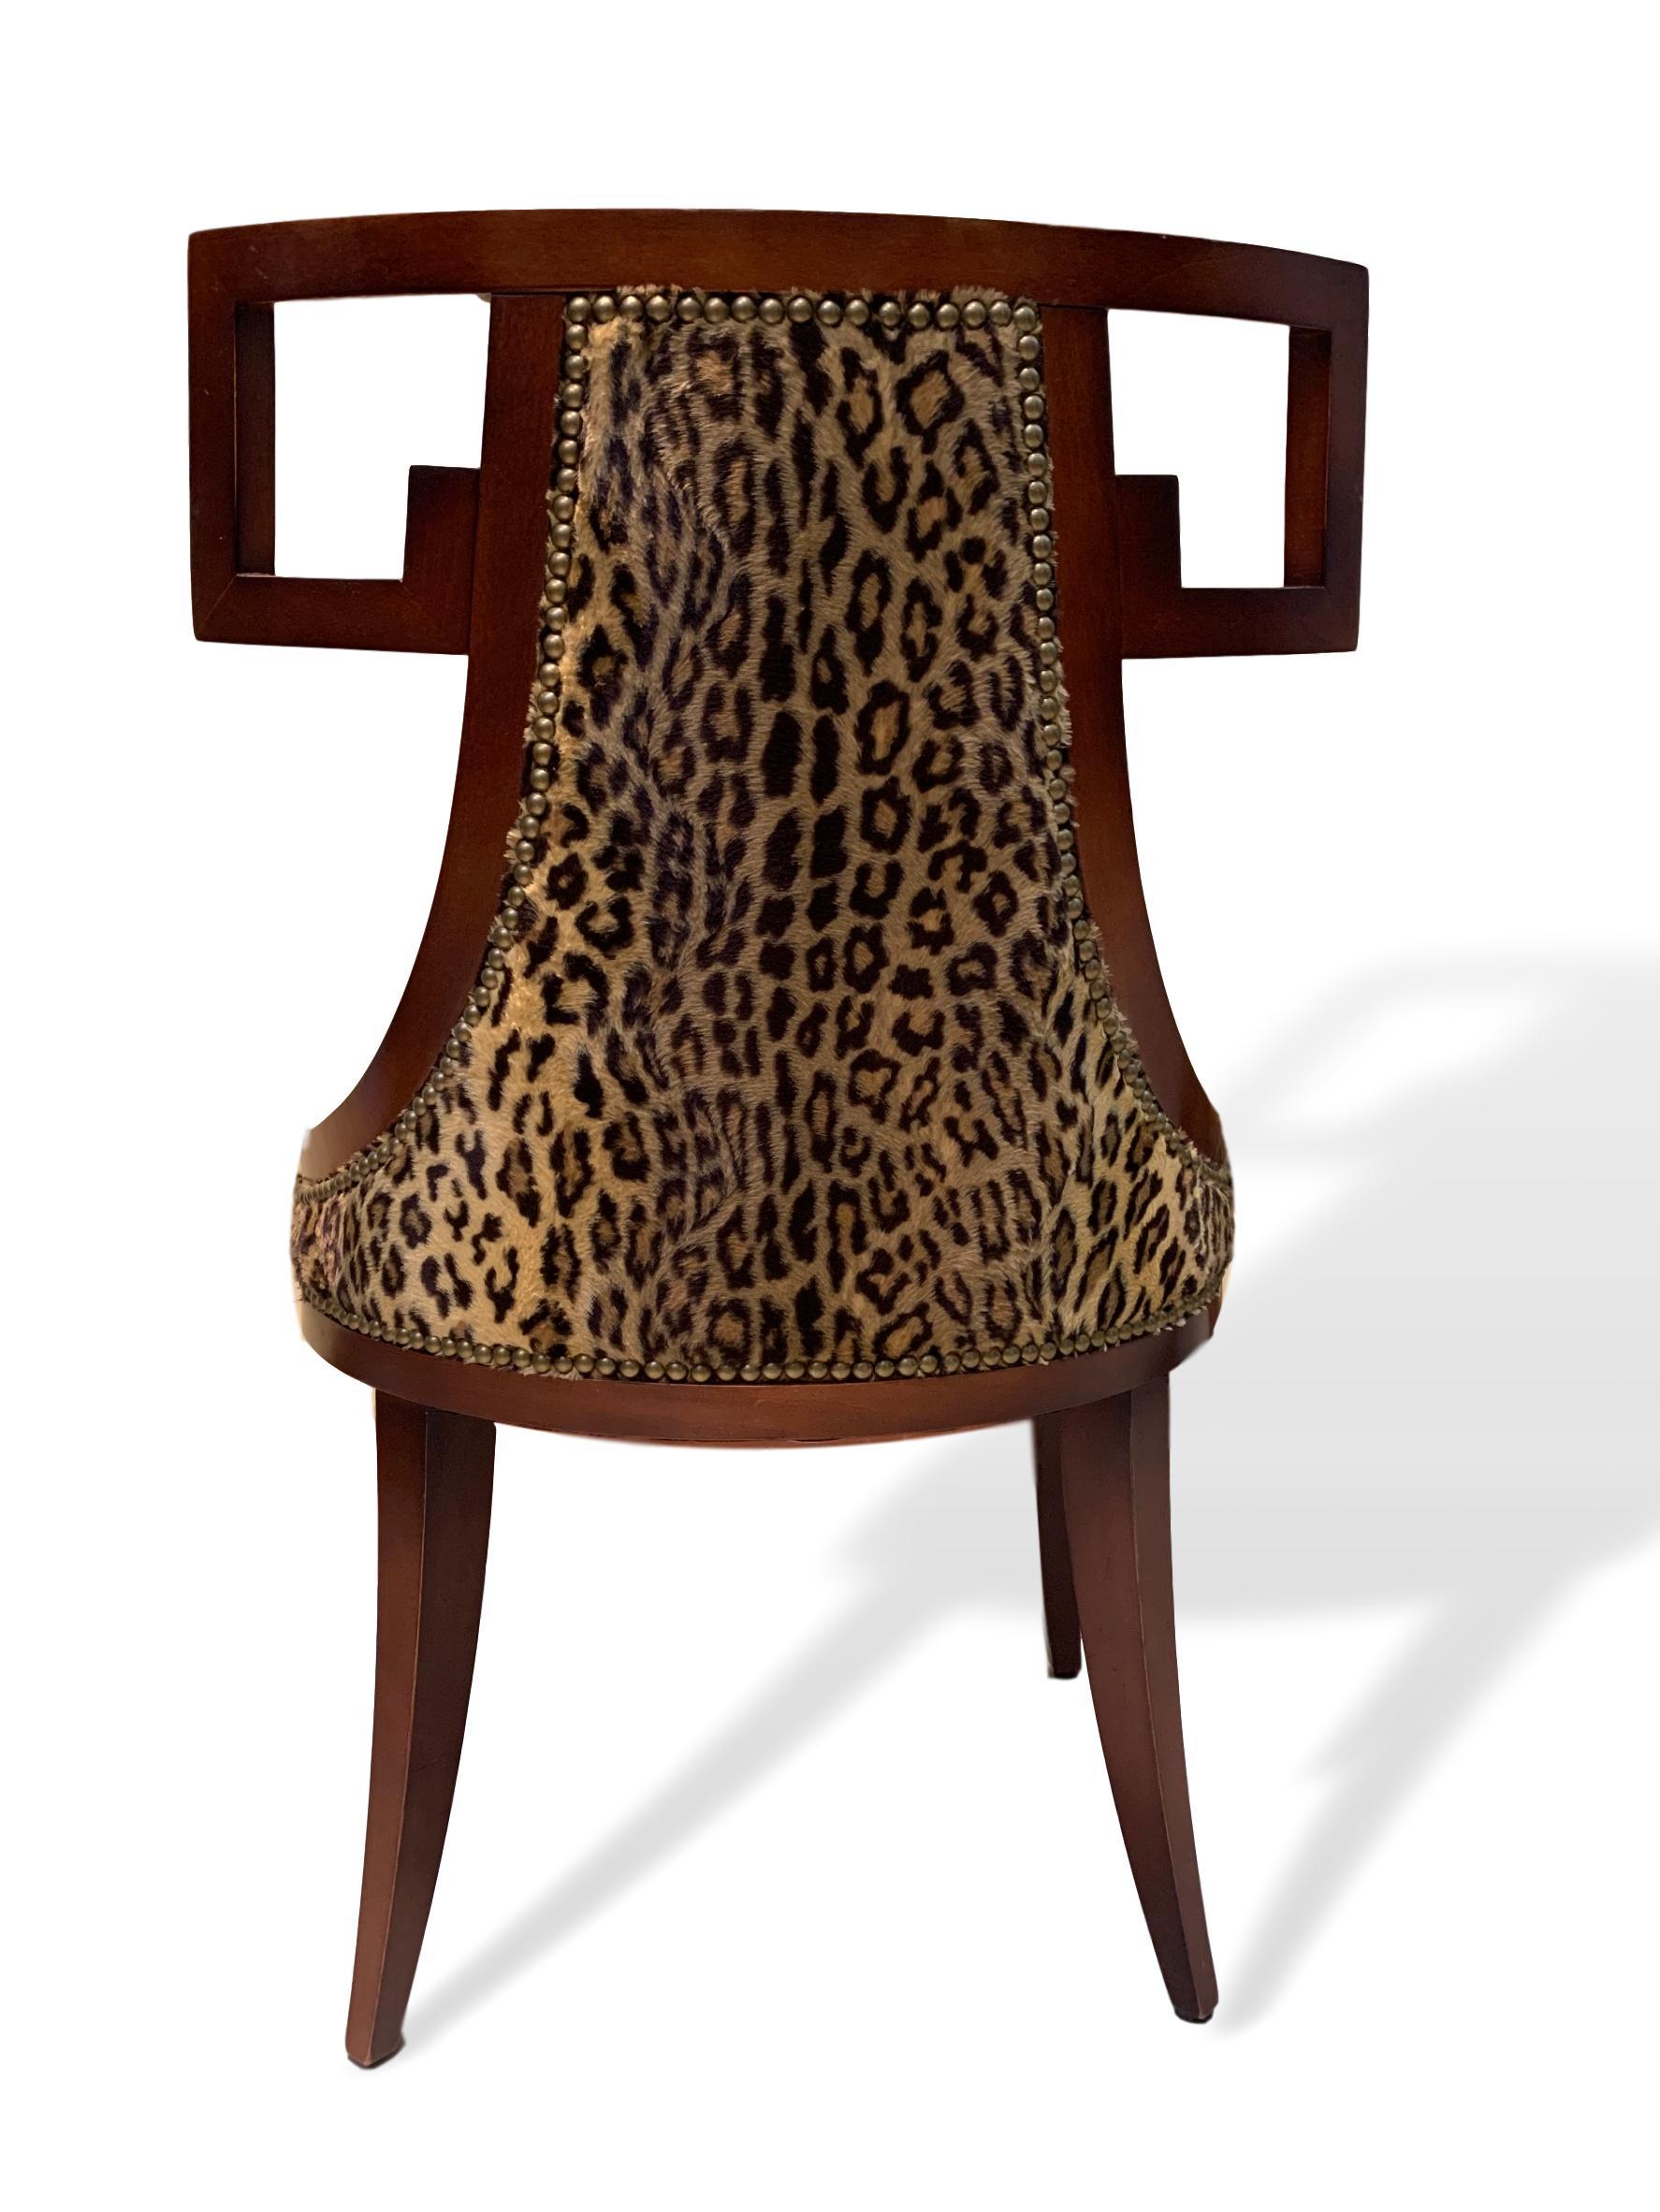 American Pair of Baker Greek Key Chairs Newly Upholstered in Ralph Lauren Leopard Fabric For Sale